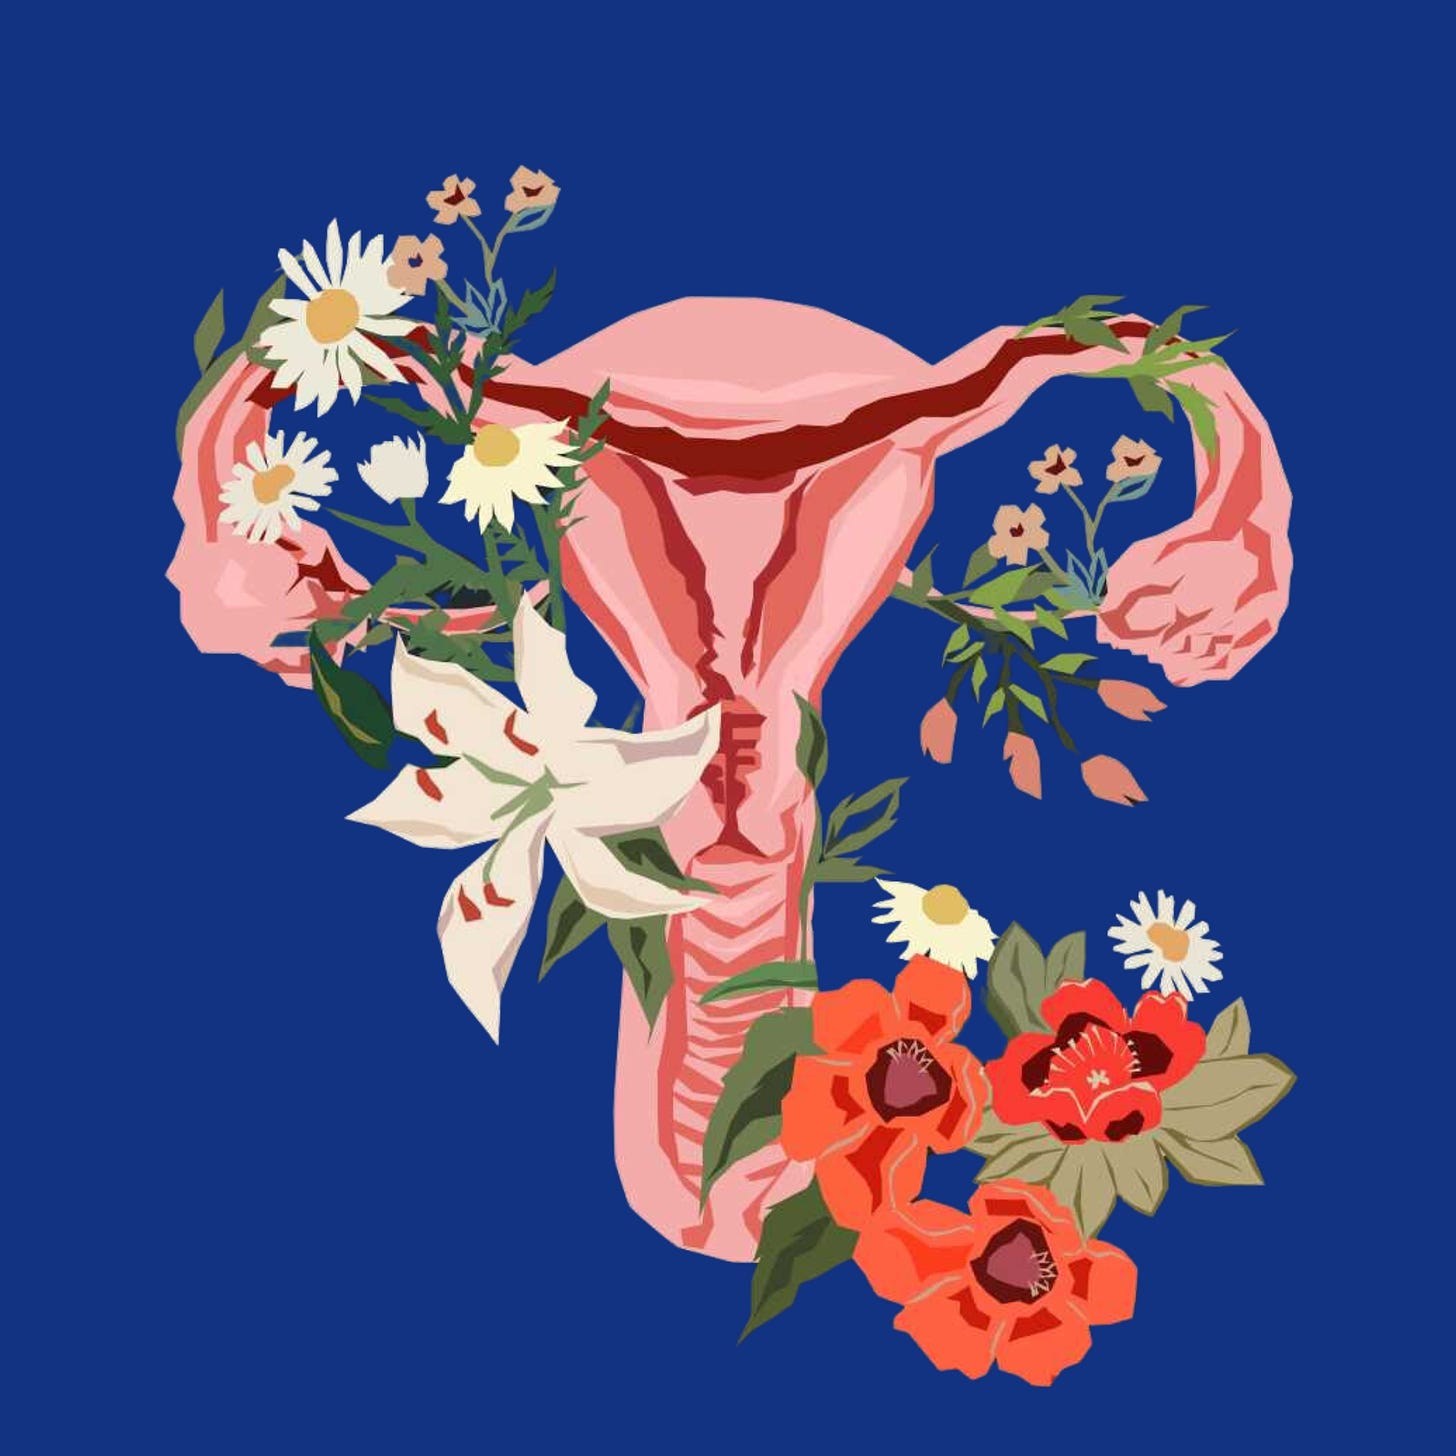 Image of female reproductive system on blue background with flowers around it